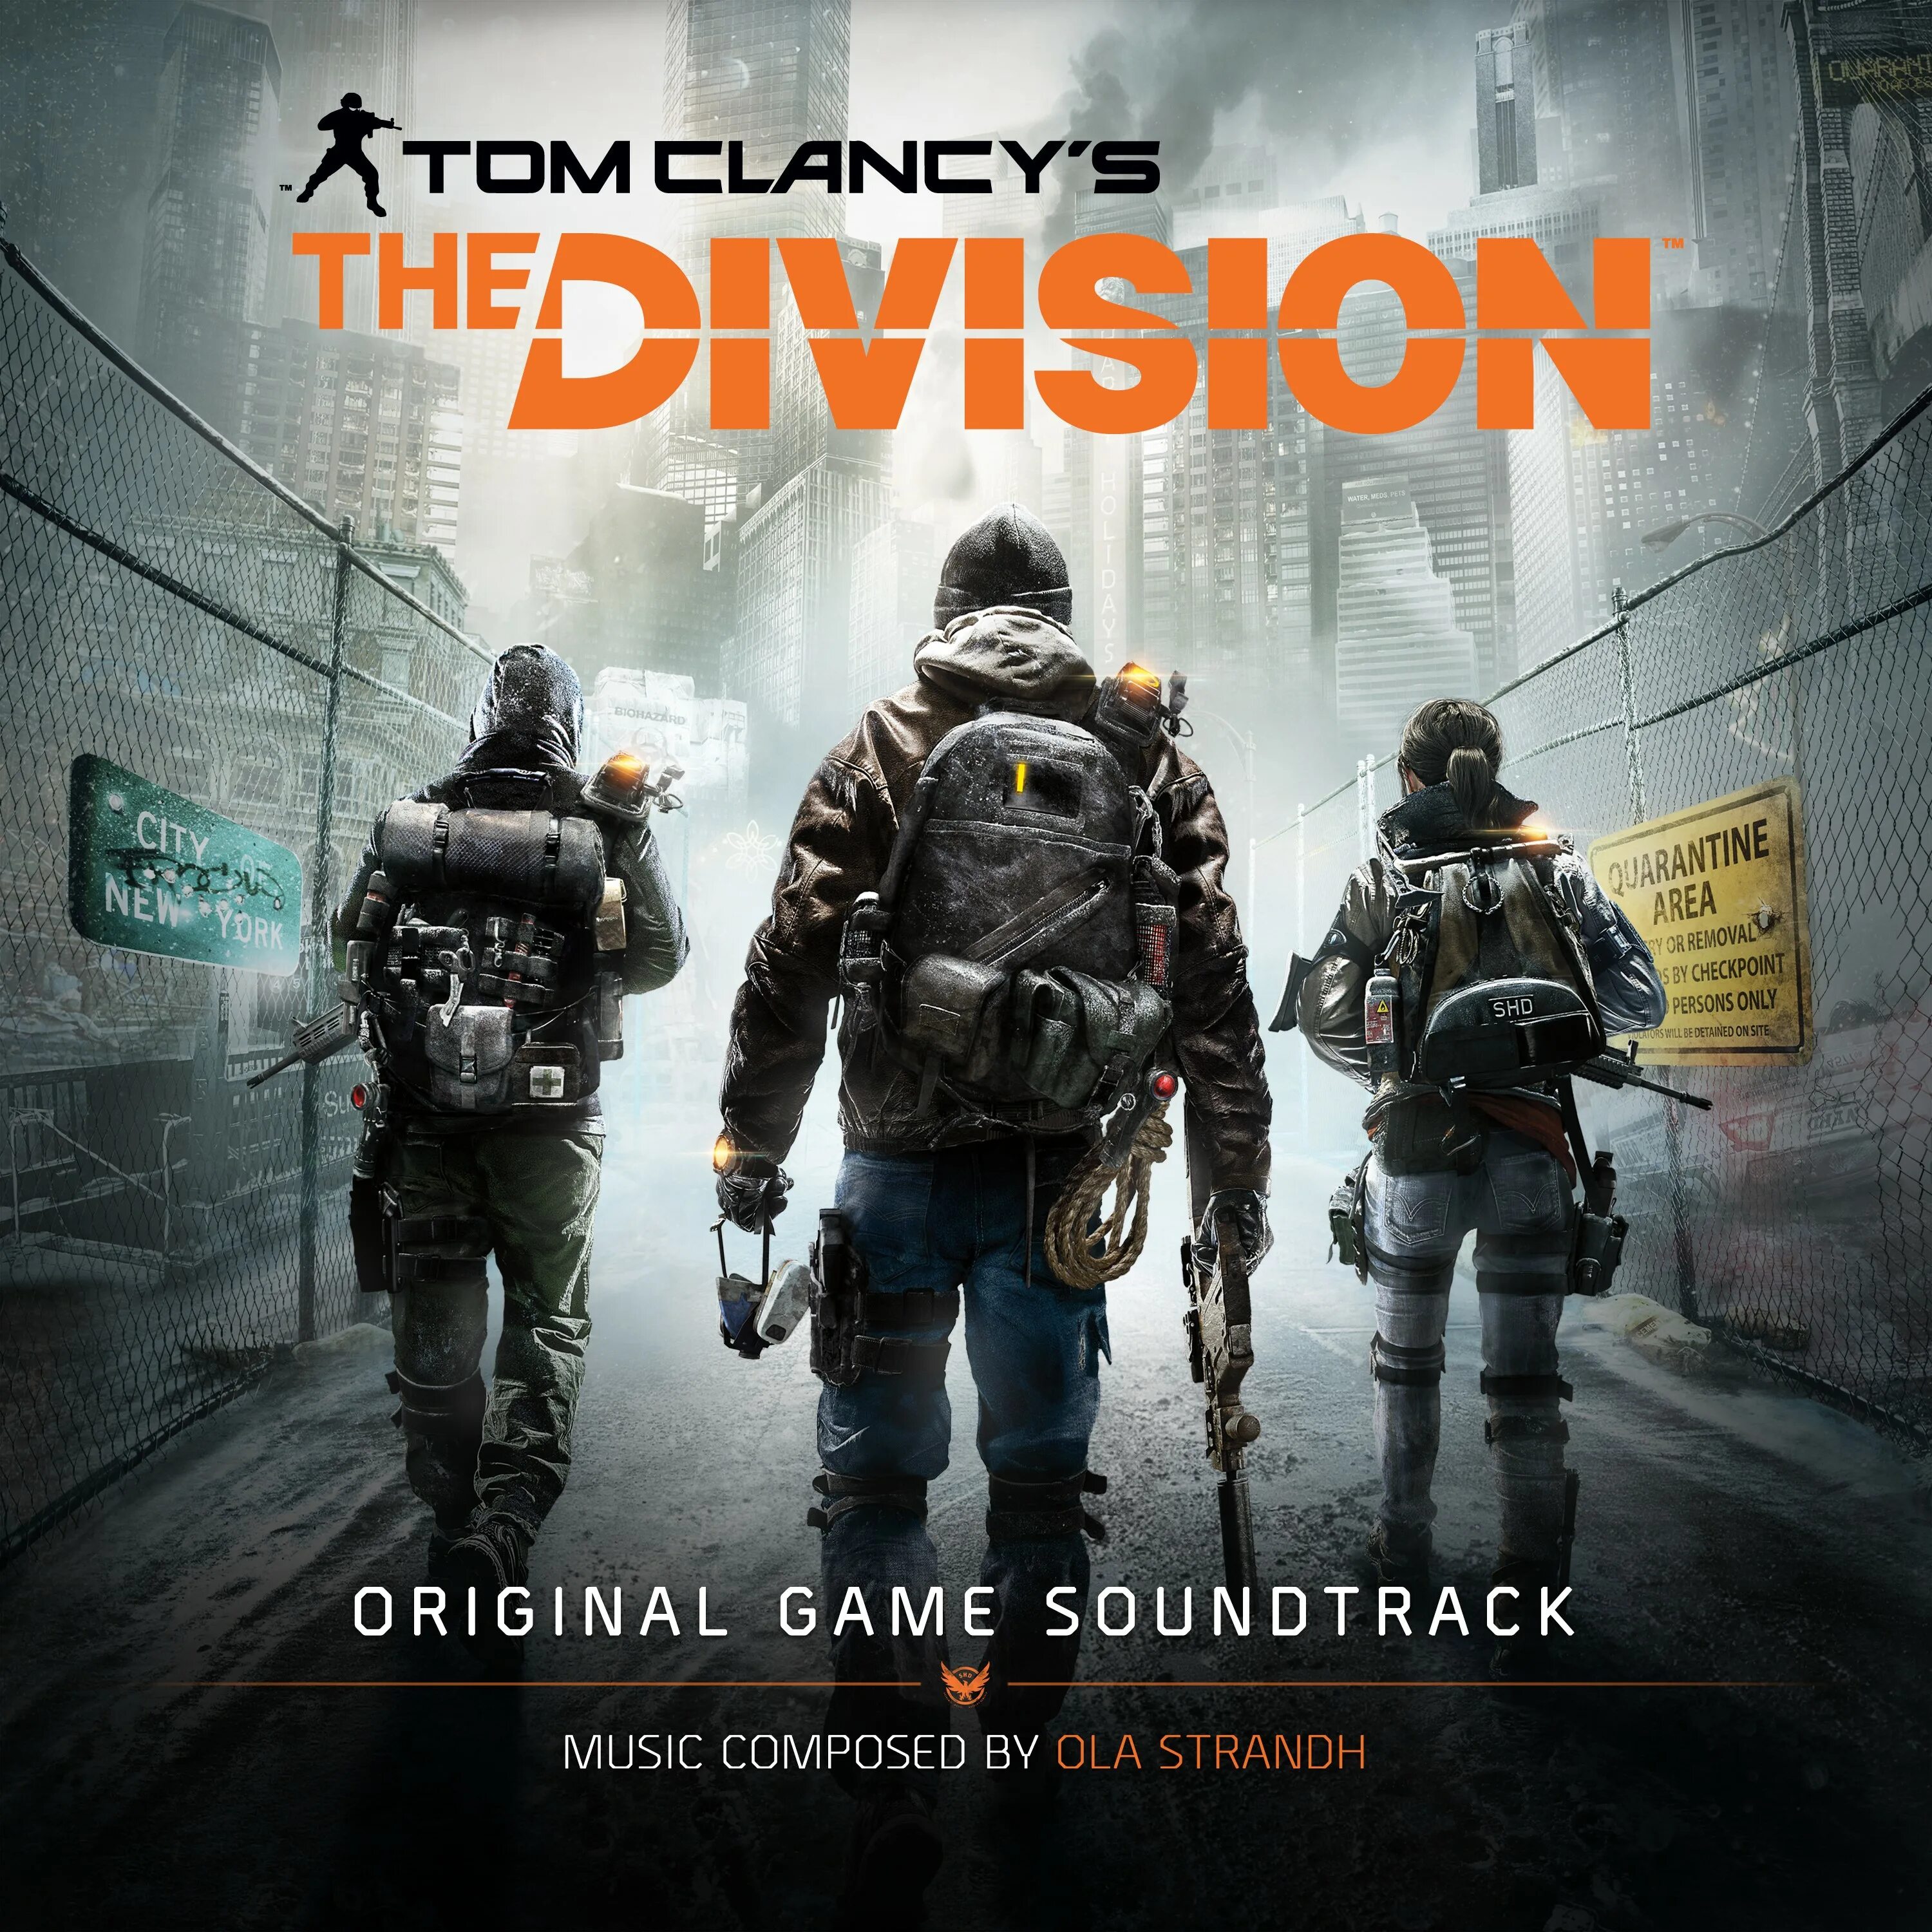 Tom Clancy's the Division ps4]. Tom Clancy's the Division обложка. Tom Clancy’s the Division 2 обложка. Том Клэнси дивизион 1. Том клэнси tom clancy s